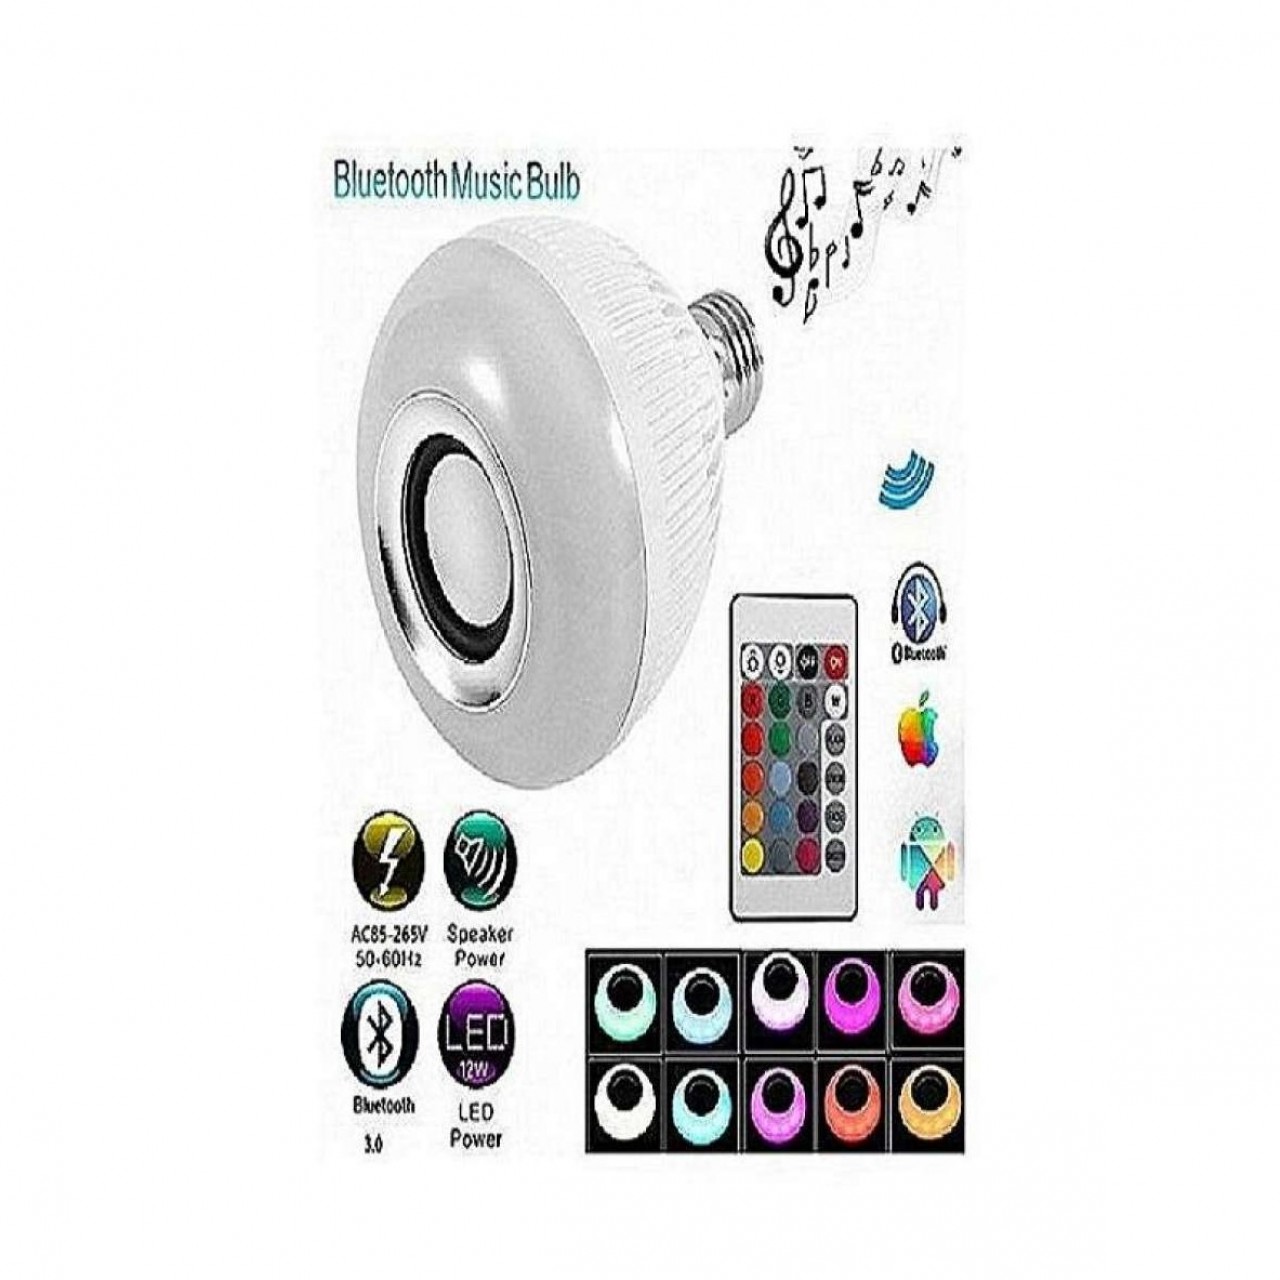 Smart Led Light Bulb With Blue Tooth Speaker - 10W E27 Smartphone App Controlled Music Bulb